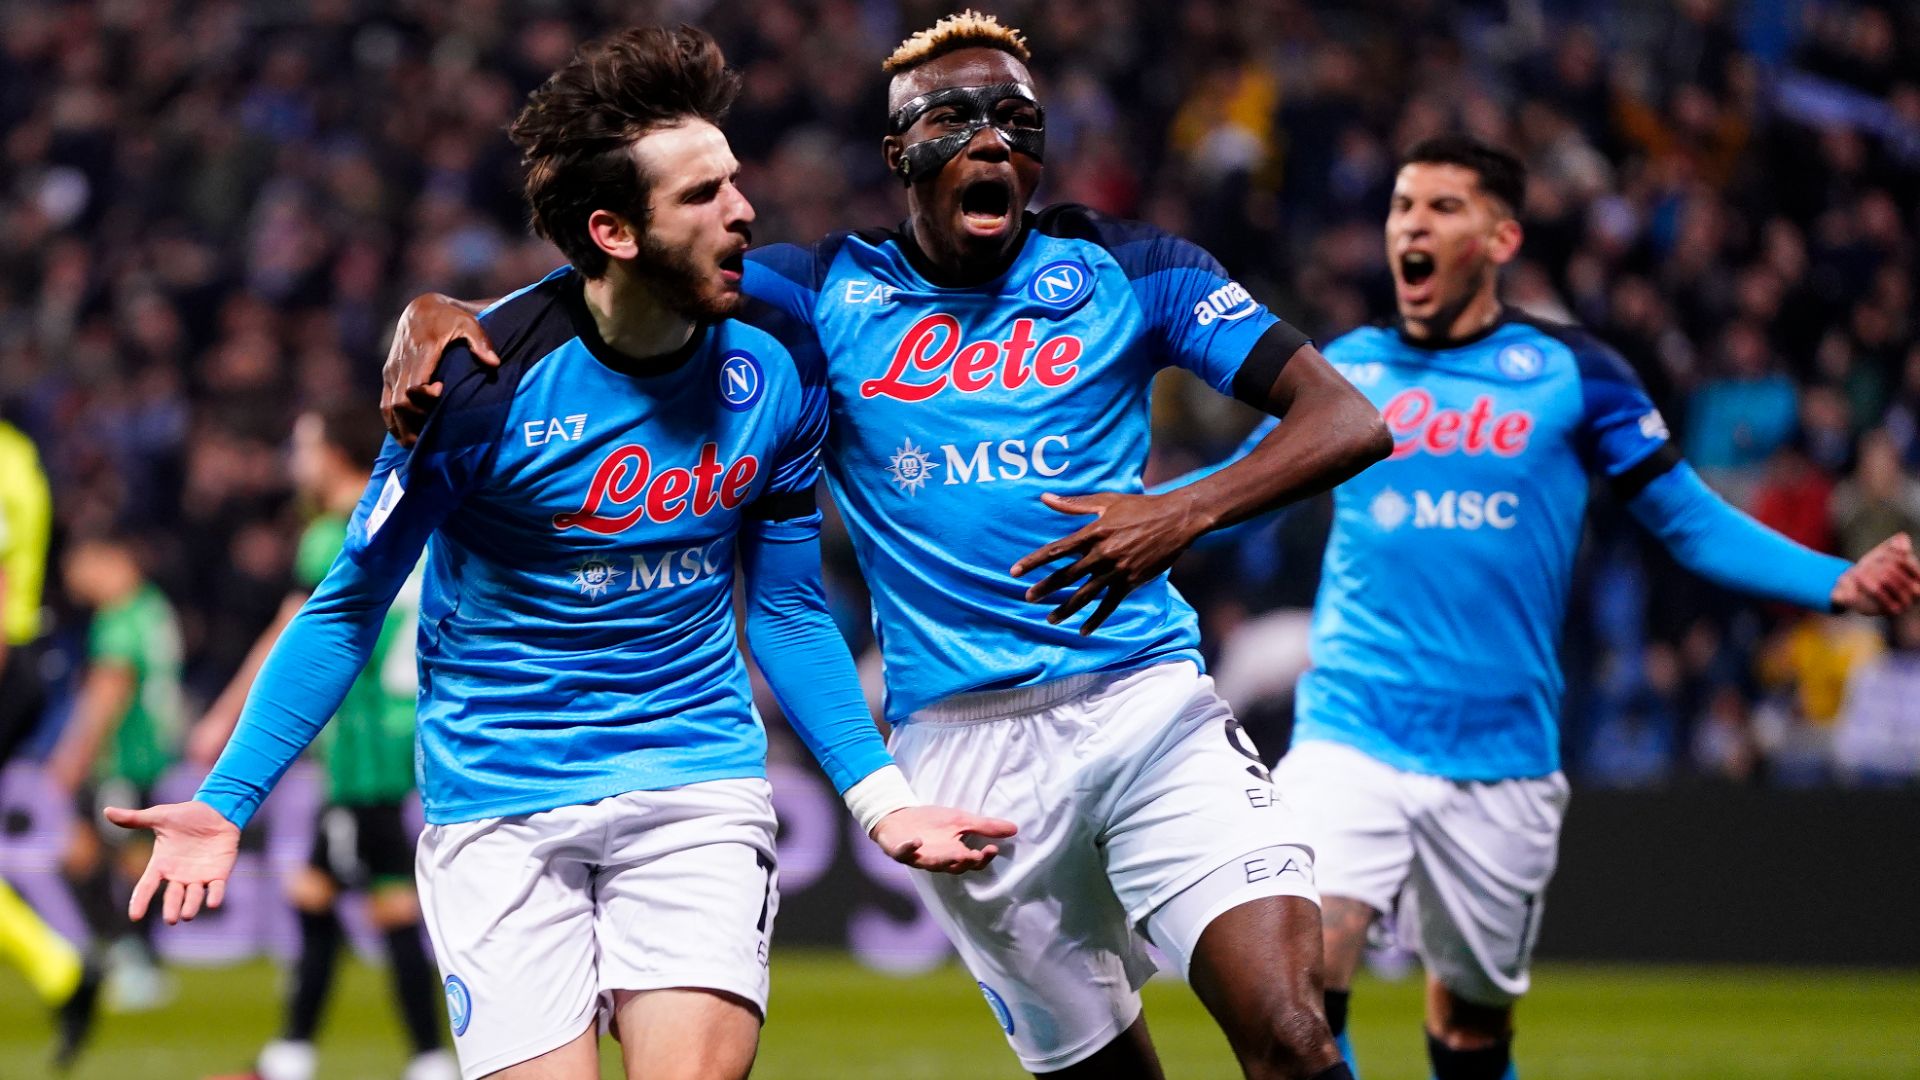 Complete' Napoli are favourites for Champions League glory, says Gullit